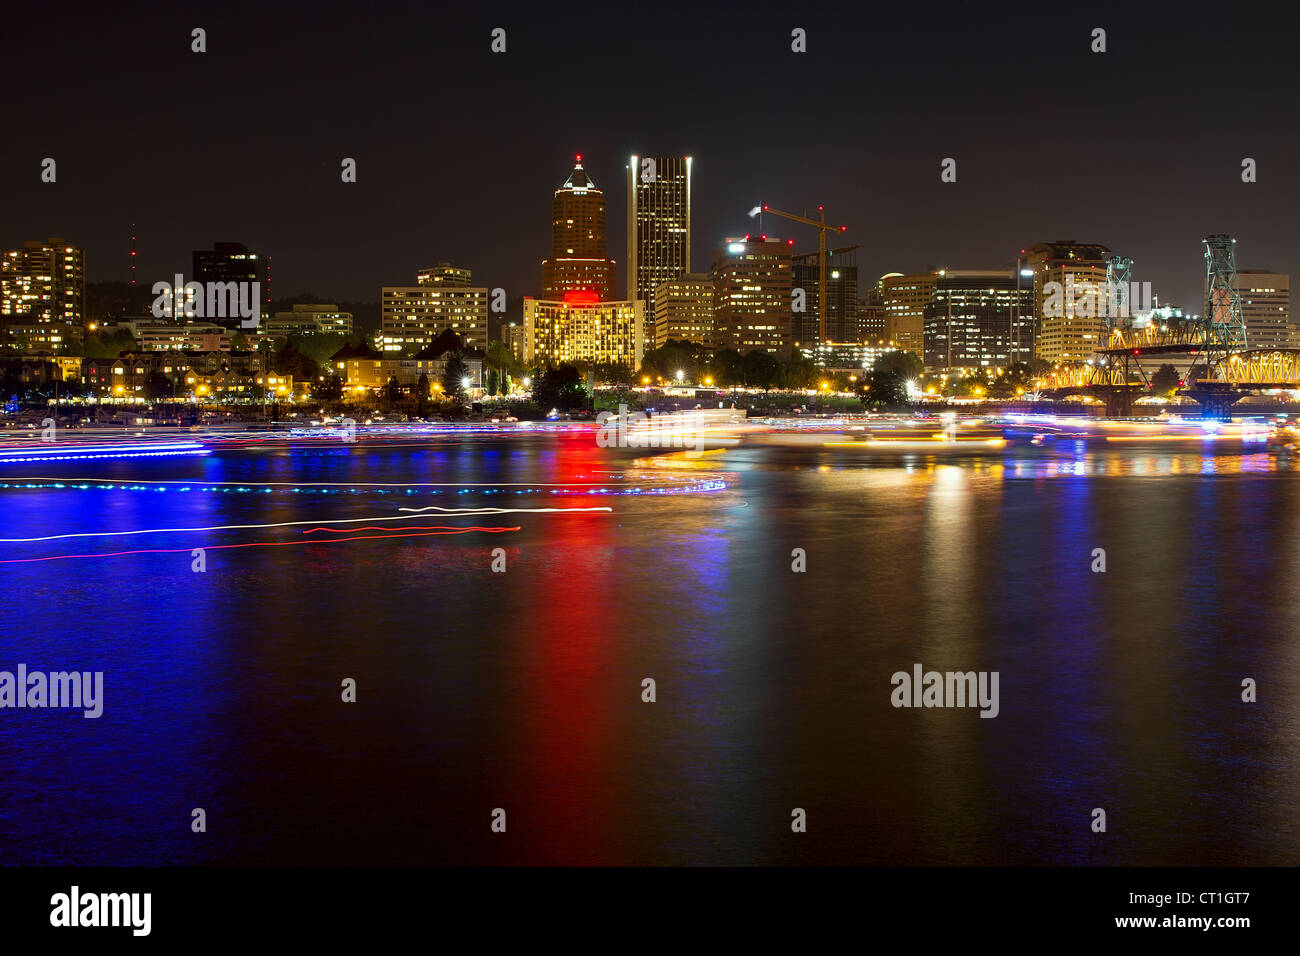 Boat Lights Trails Along Willamette River the City Skyline of Portland Oregon Waterfront at Night Stock Photo